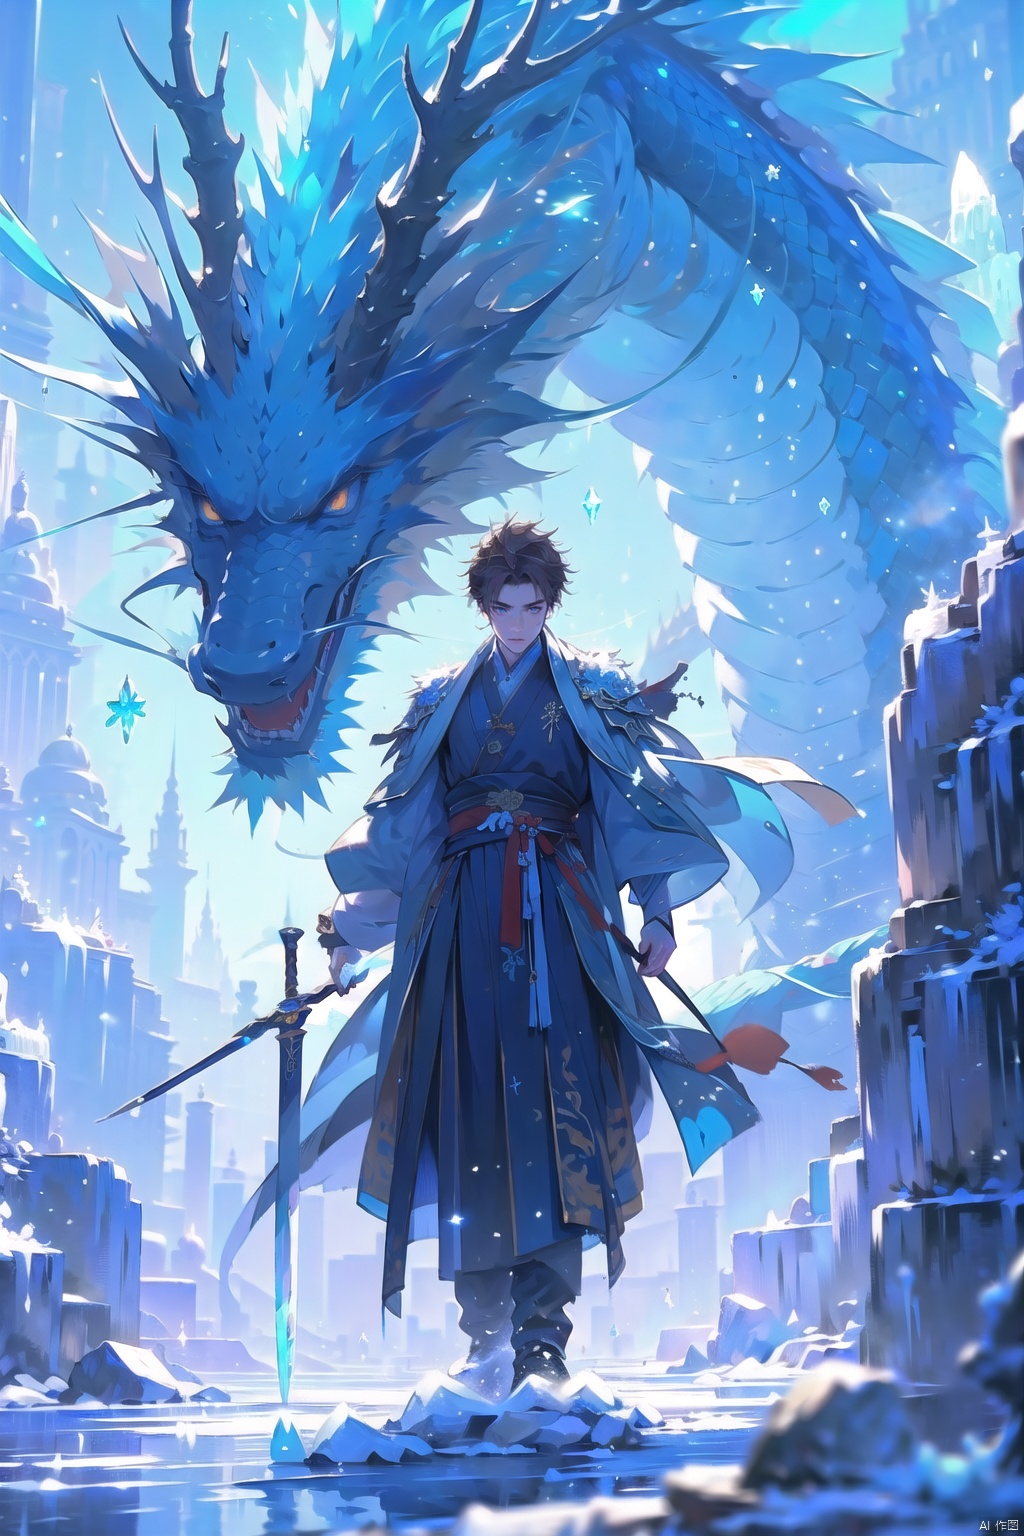  ice magic,(1boy:1.5),1boy, solo,full body,front
,brown hair,handsome, white skin,holding sword,sword,blue theme, holding, holding sword, holding weapon, ice,Ice Magic,Ice crystal,Icicles,ice,Chinese Ice Dragon,short hair,whole body,solo, standing, sword, weaponFacial detail portrayal,Perfect facial features,standing,watch audience,